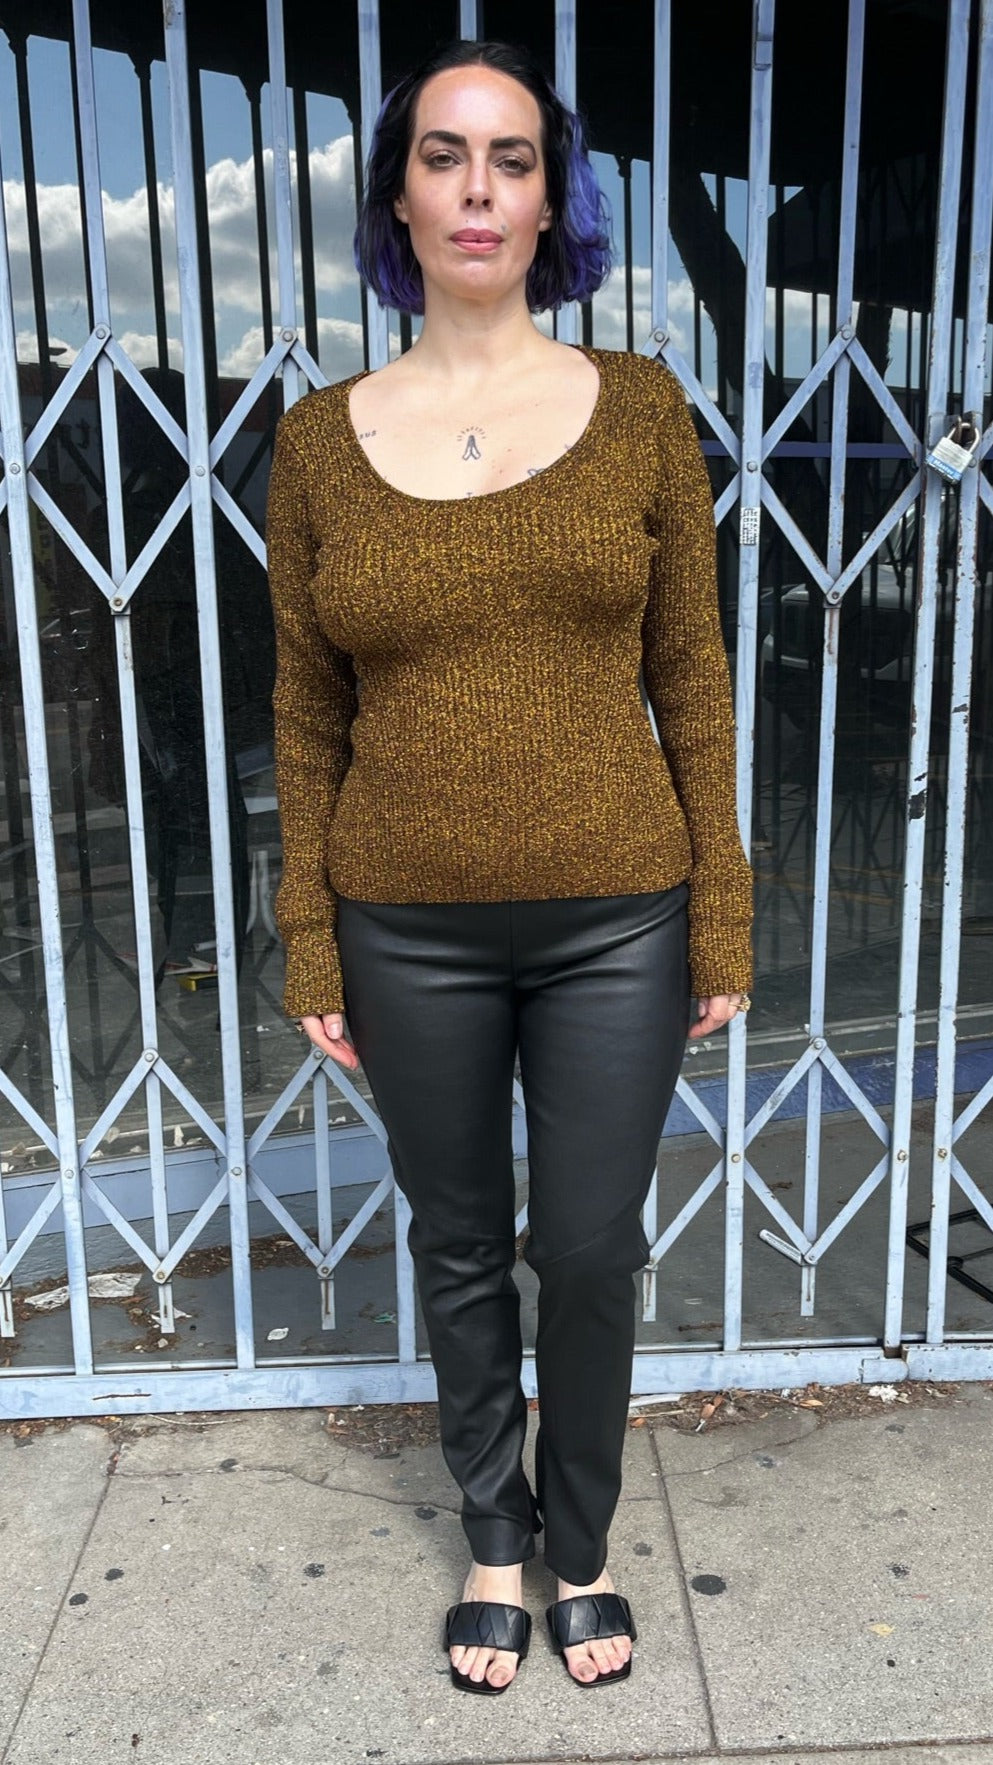 Full-body front view of a size XL (fits up to size 24) GANNI deep gold metallic ribbed knit sweater styled with leather pants and black slides on a size 10 model. The photo is taken outside in natural lighting.